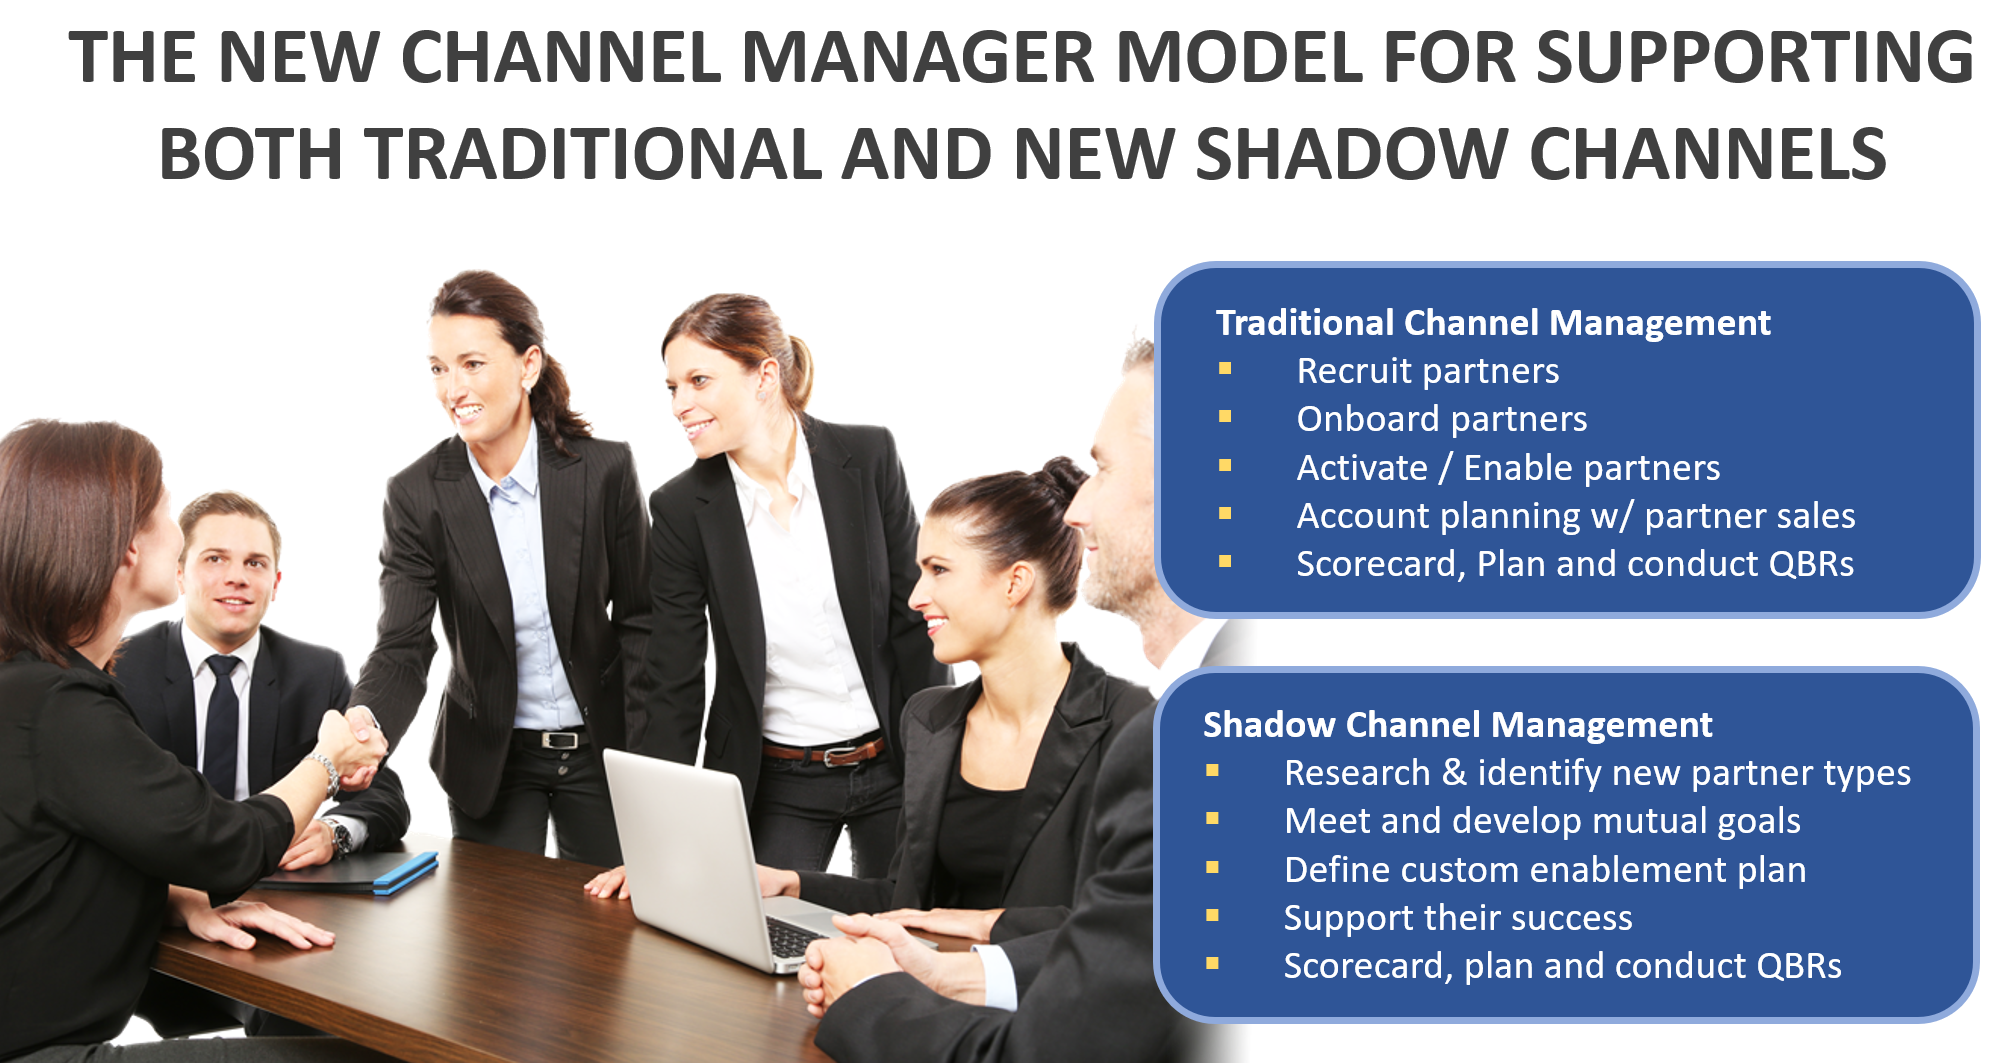 Channel Manager Model for Shadow Channels